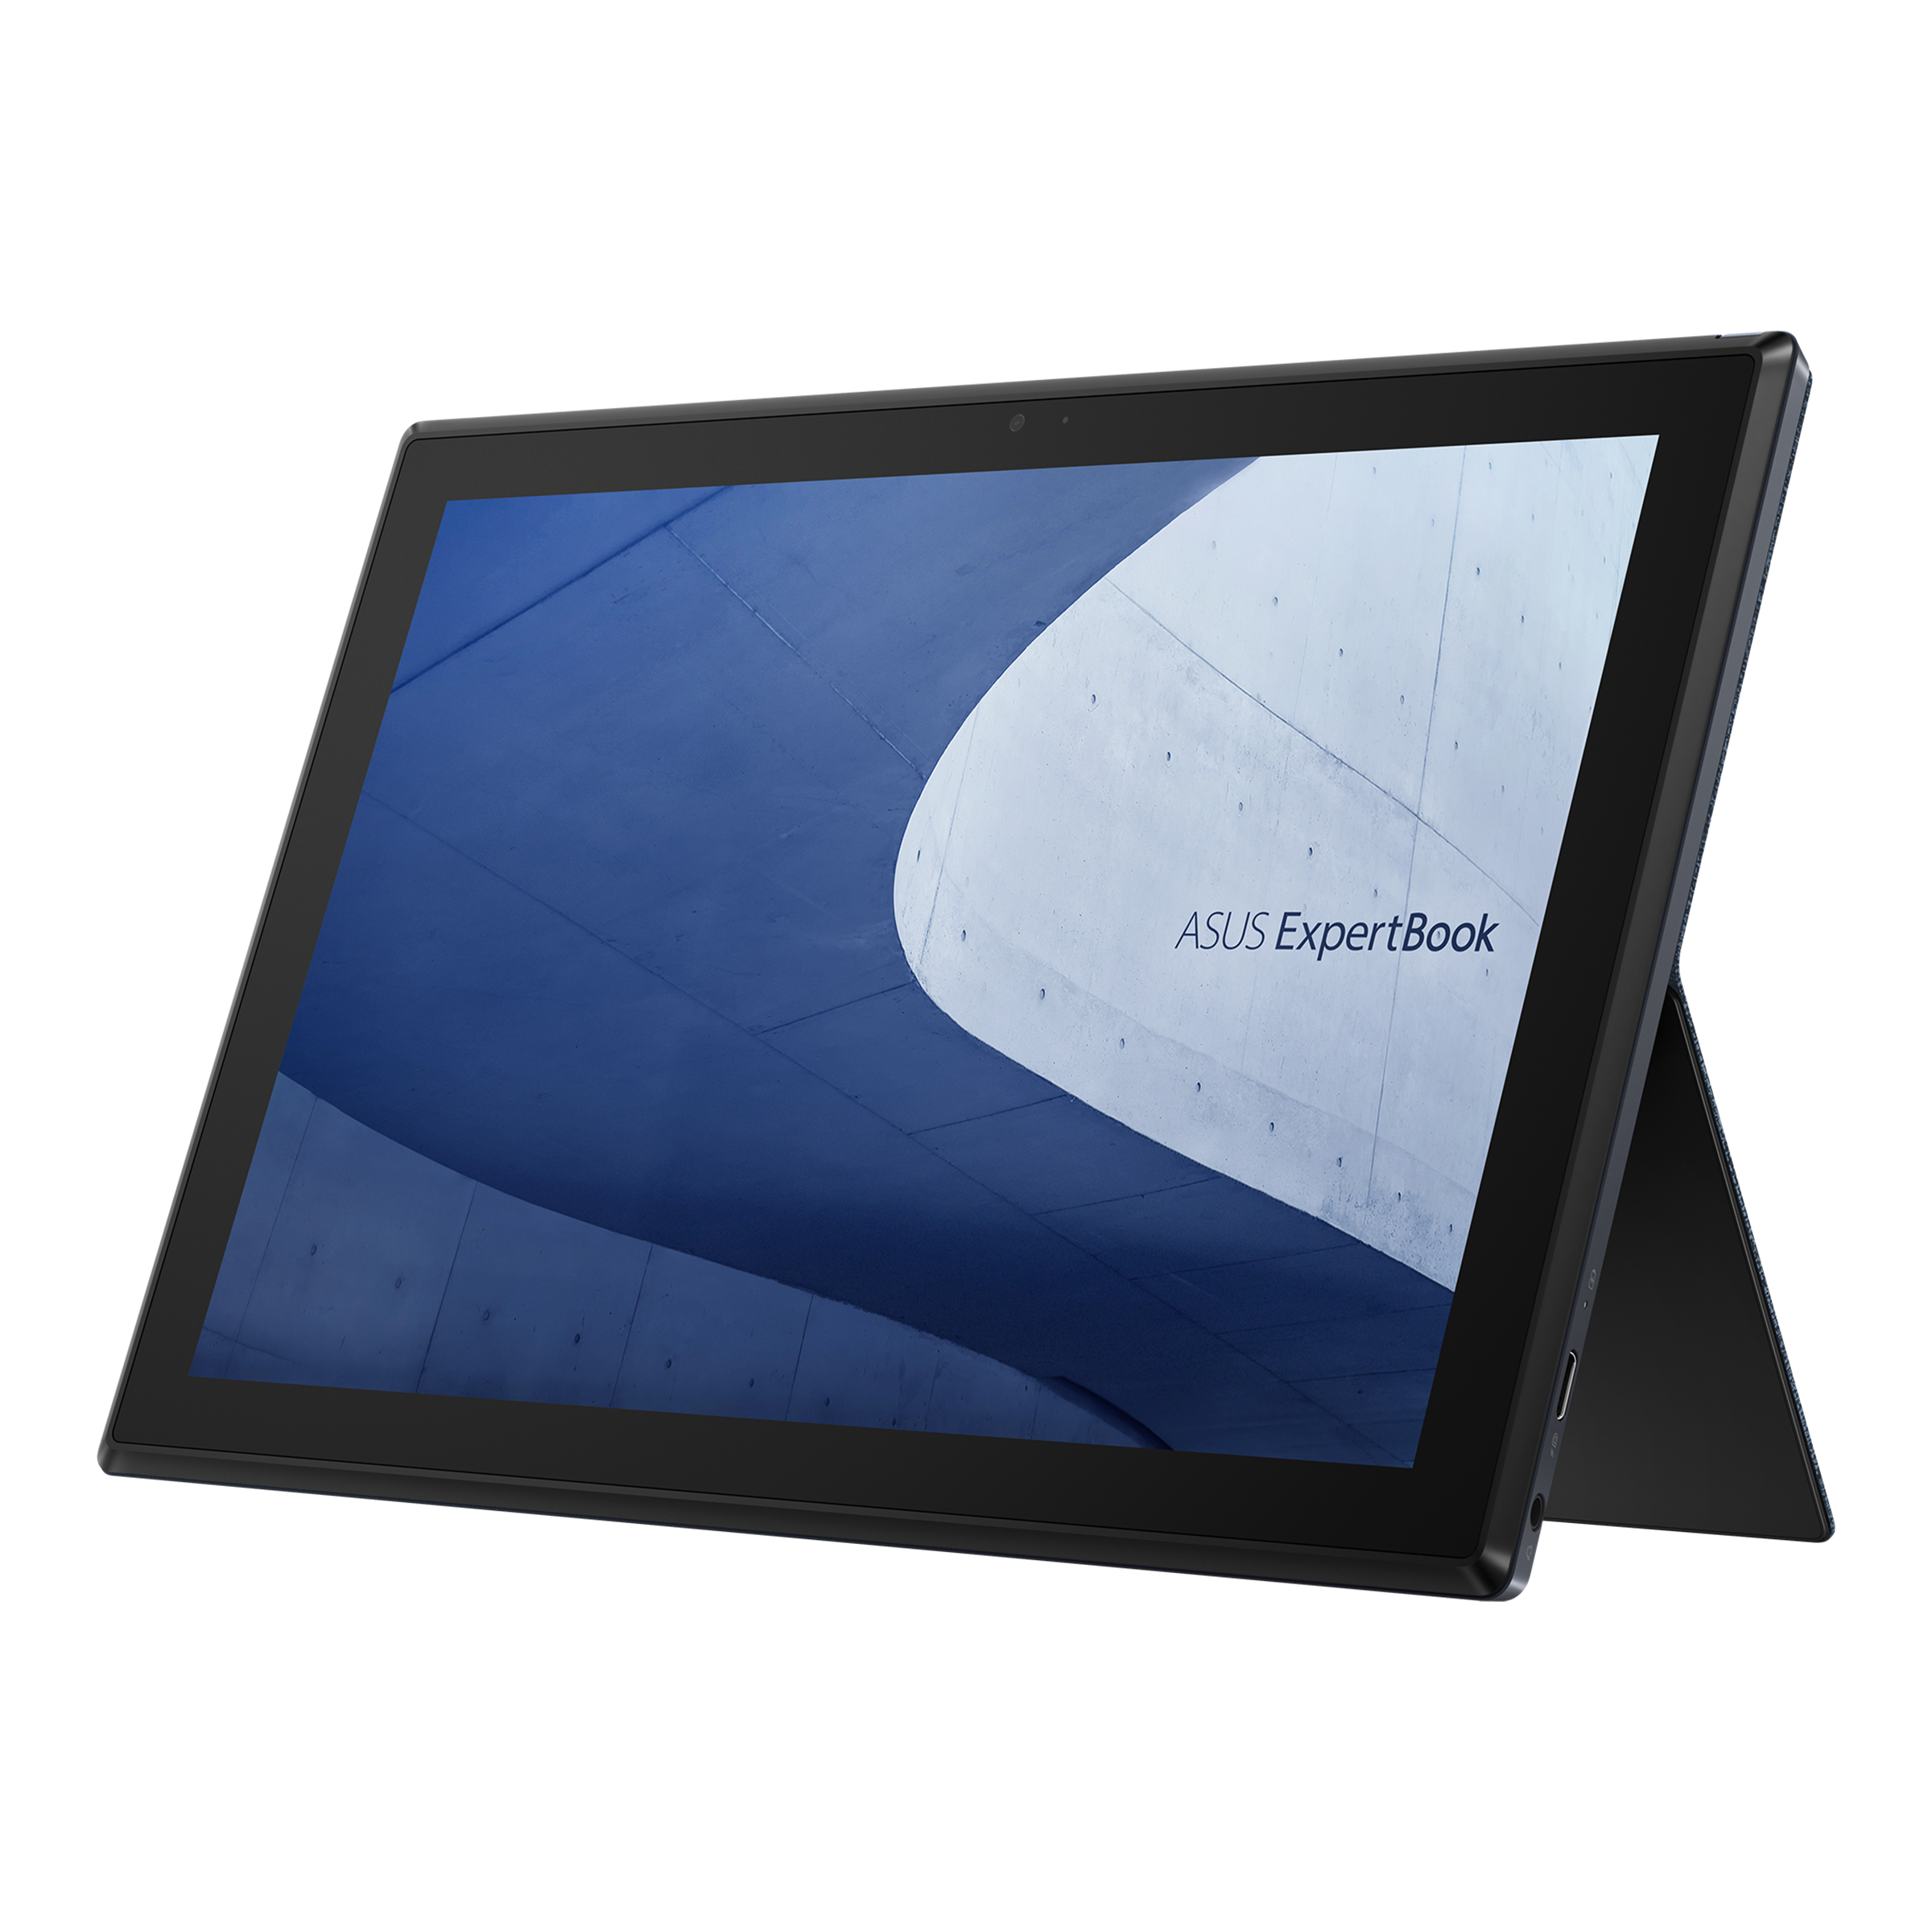 ExpertBook B3 Detachable (B3000)｜Laptops For Work｜ASUS Global